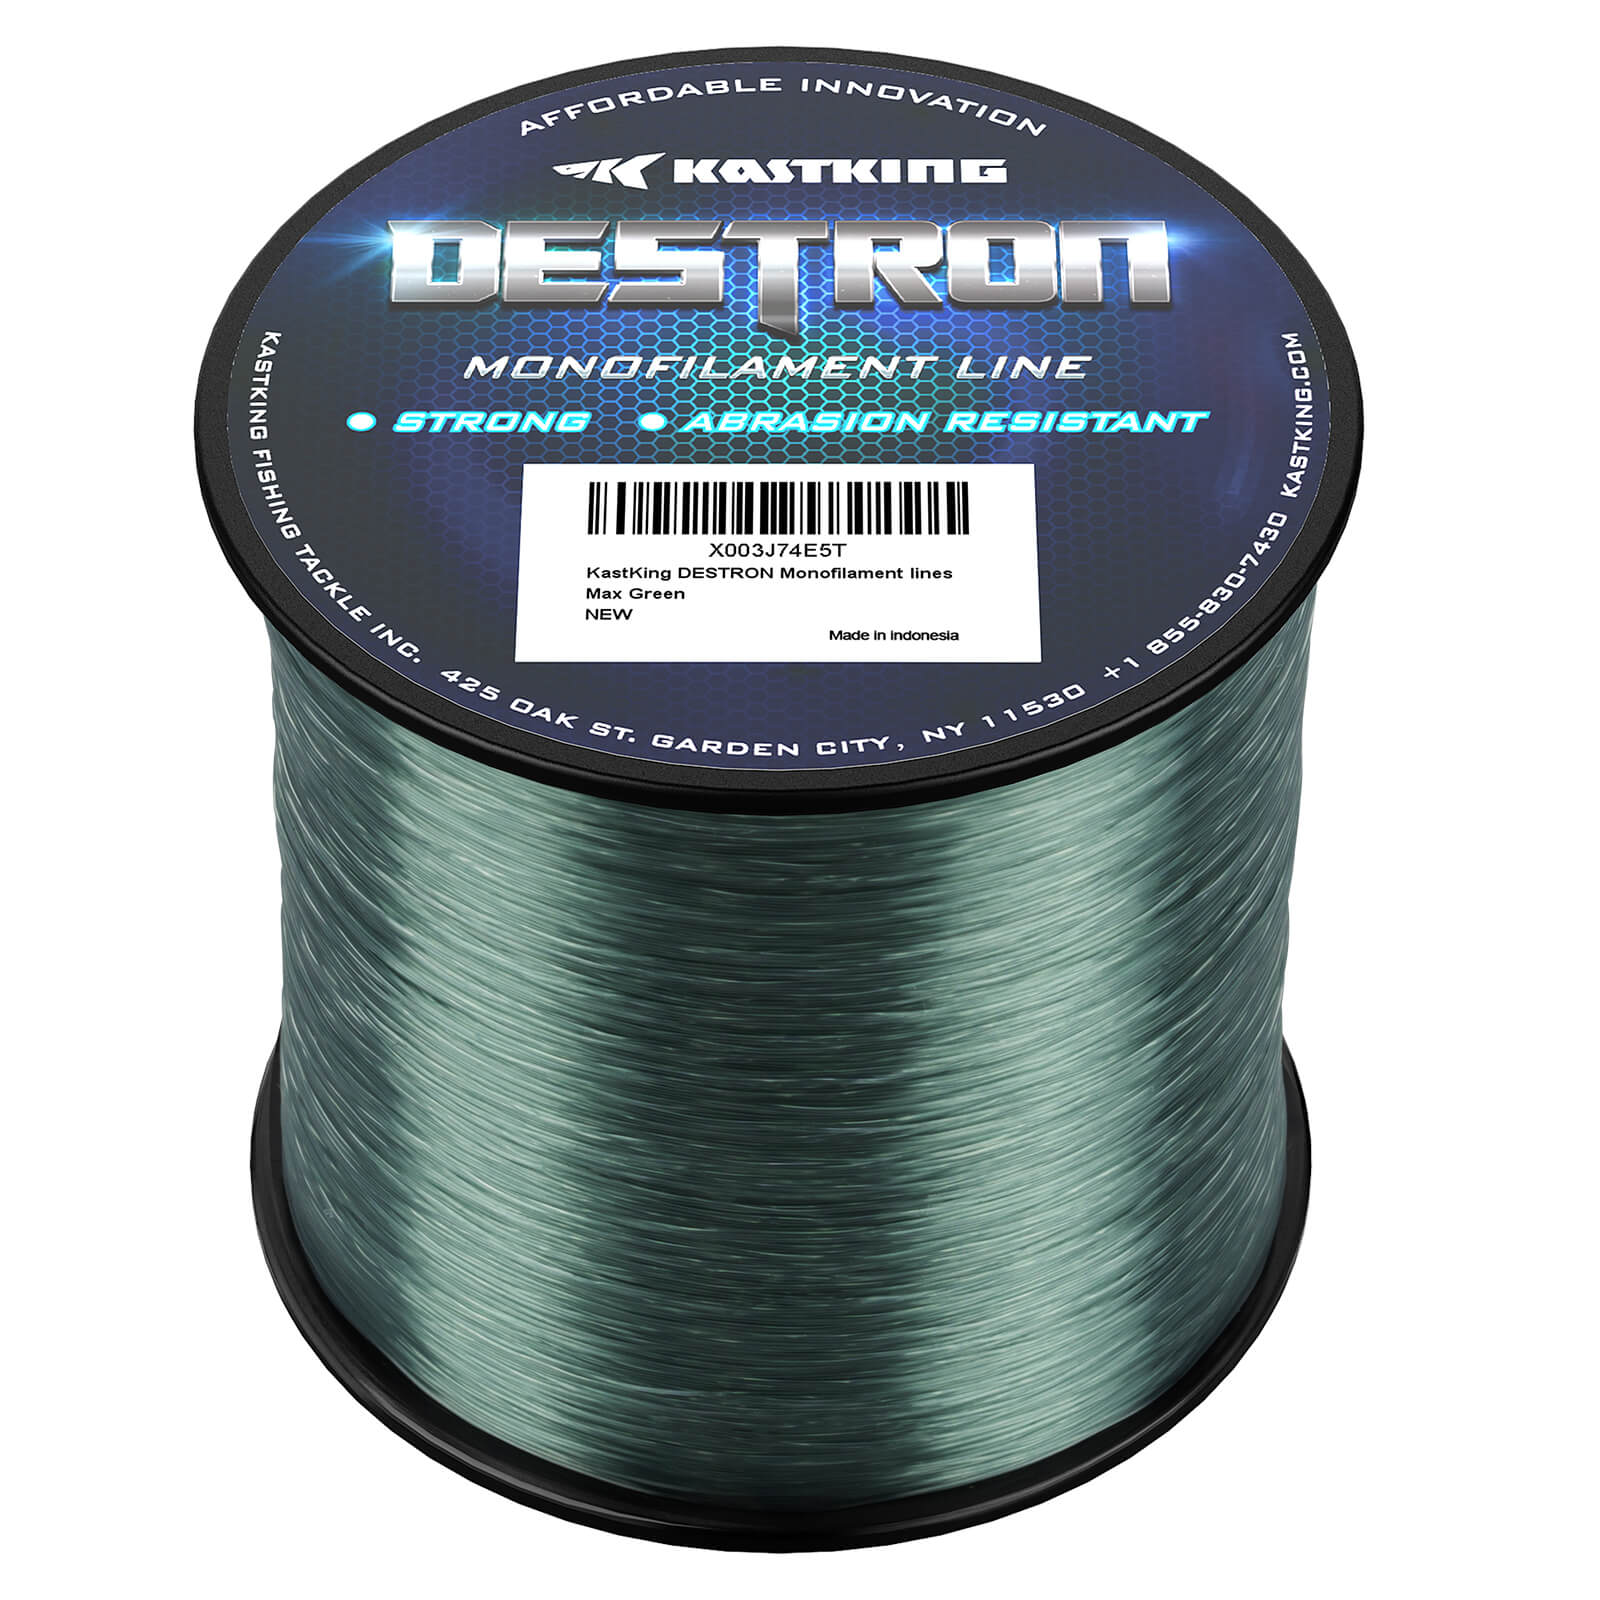 Fishing line Monofilament 20, 25 30, 40 Pound Brand new Various Brands